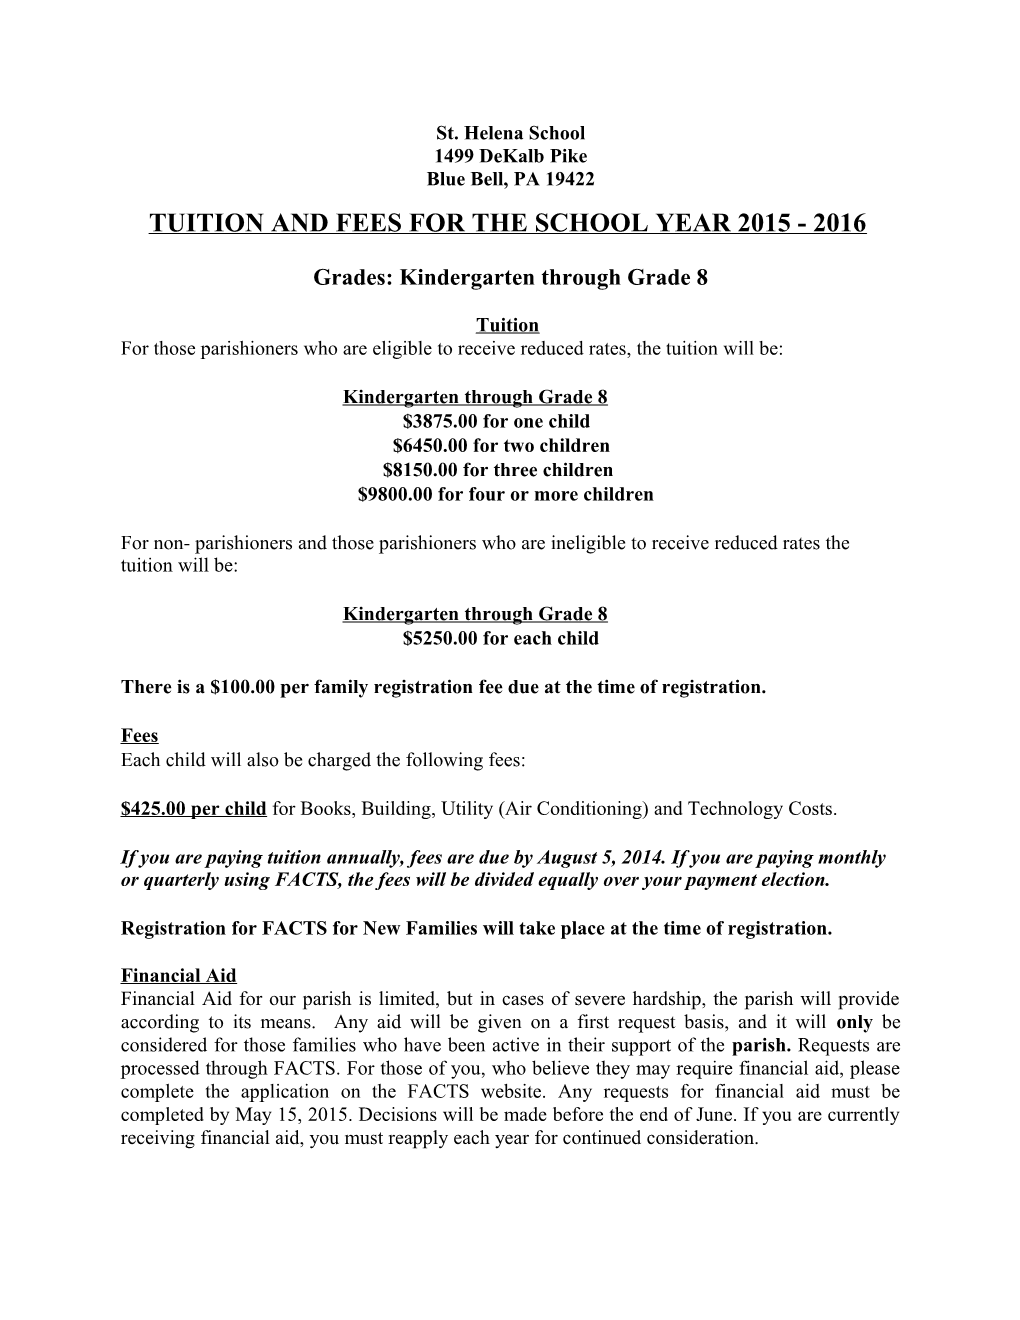 Tuition and Fees for the School Year 2015 - 2016